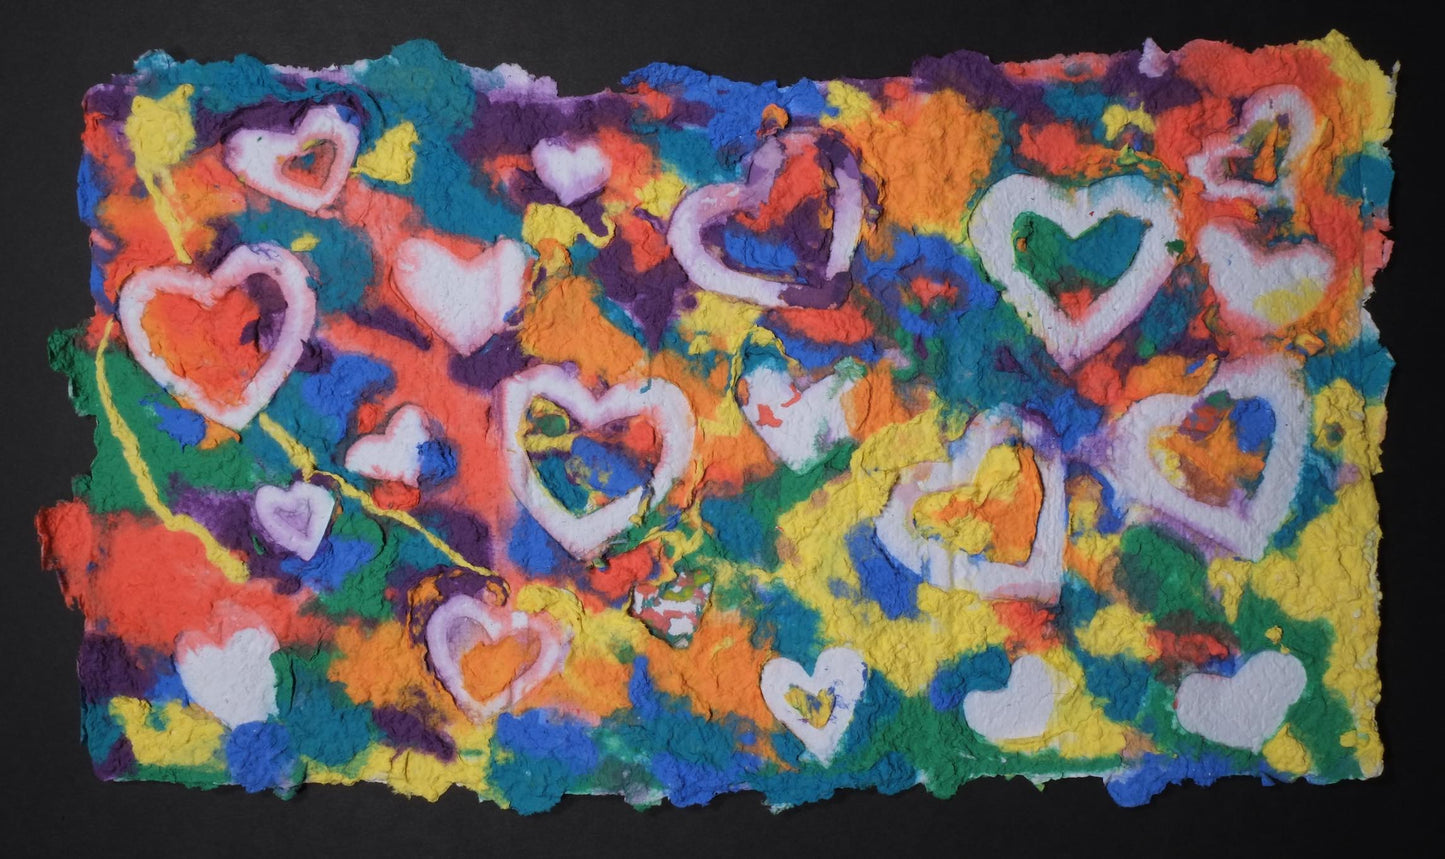 Highly textured handmade paper with various bright colors and embossed white hearts